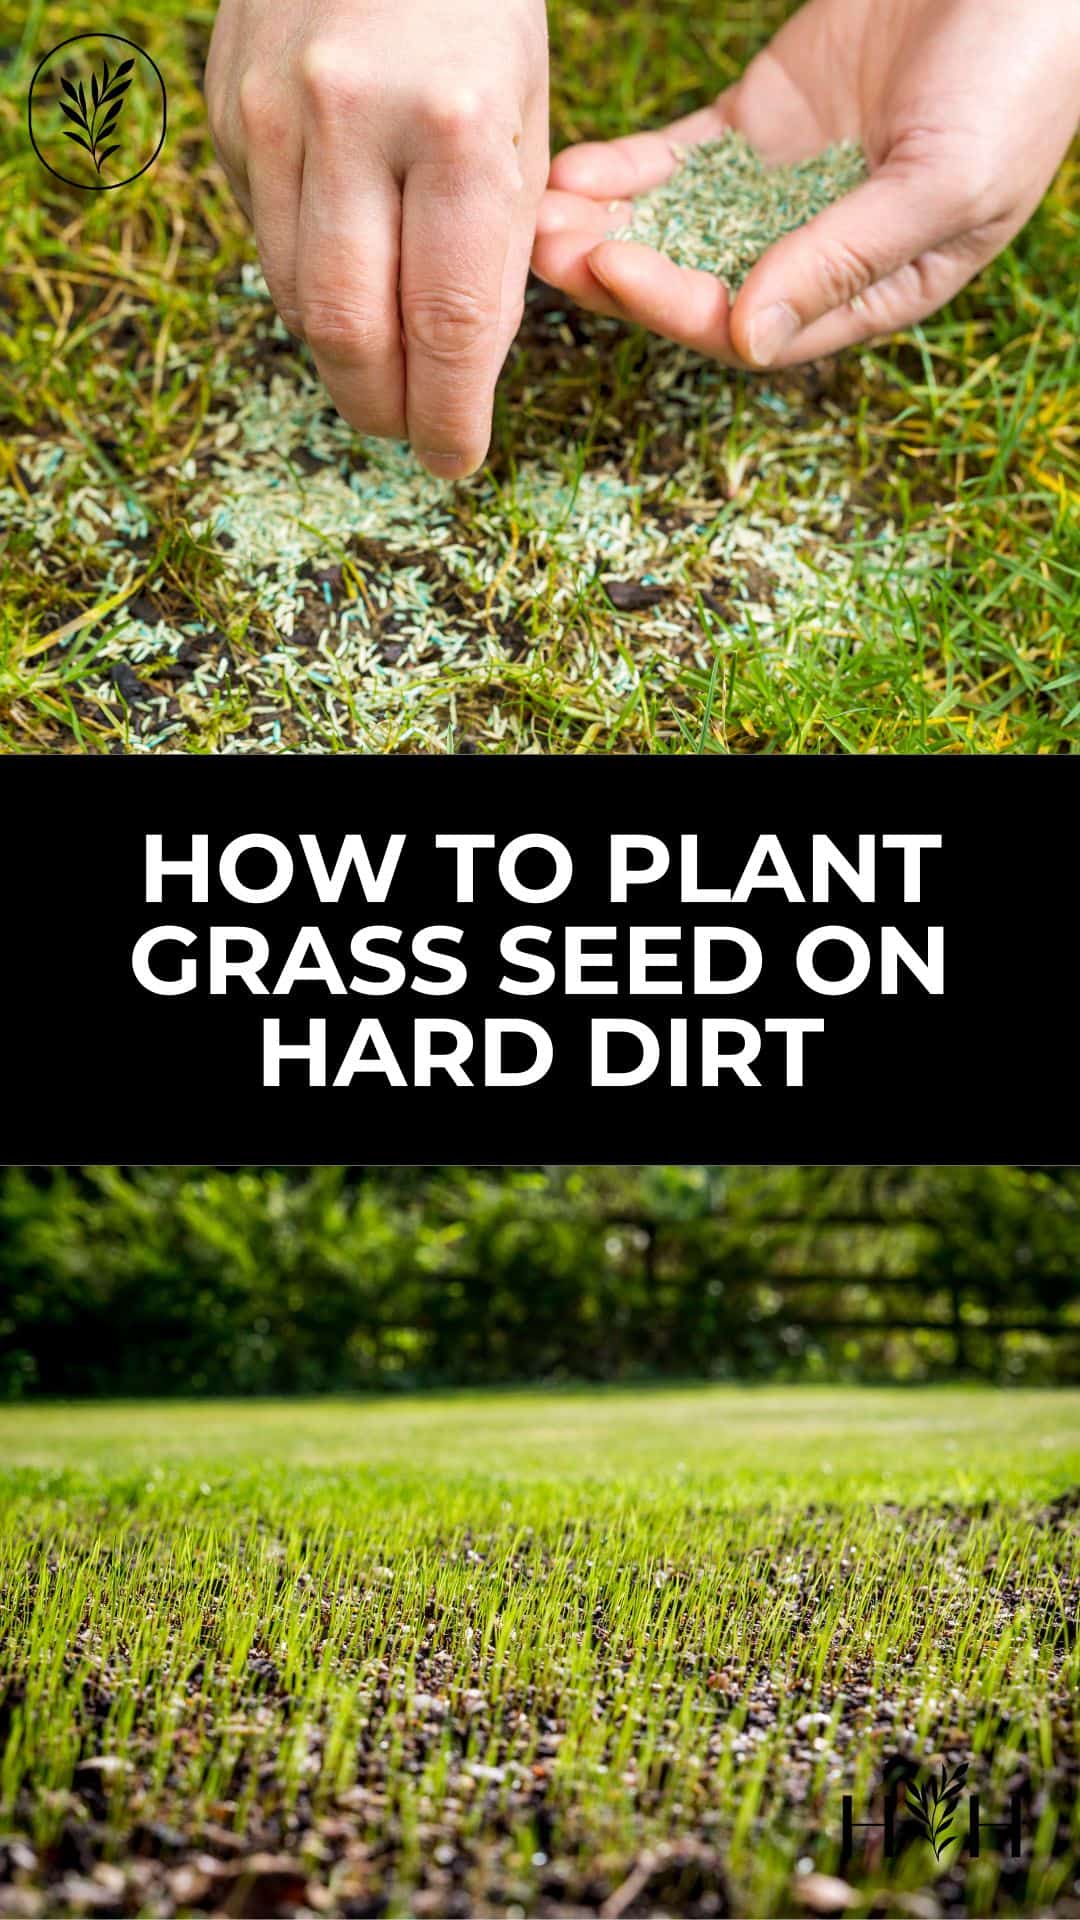 How to plant grass seed on hard dirt via @home4theharvest